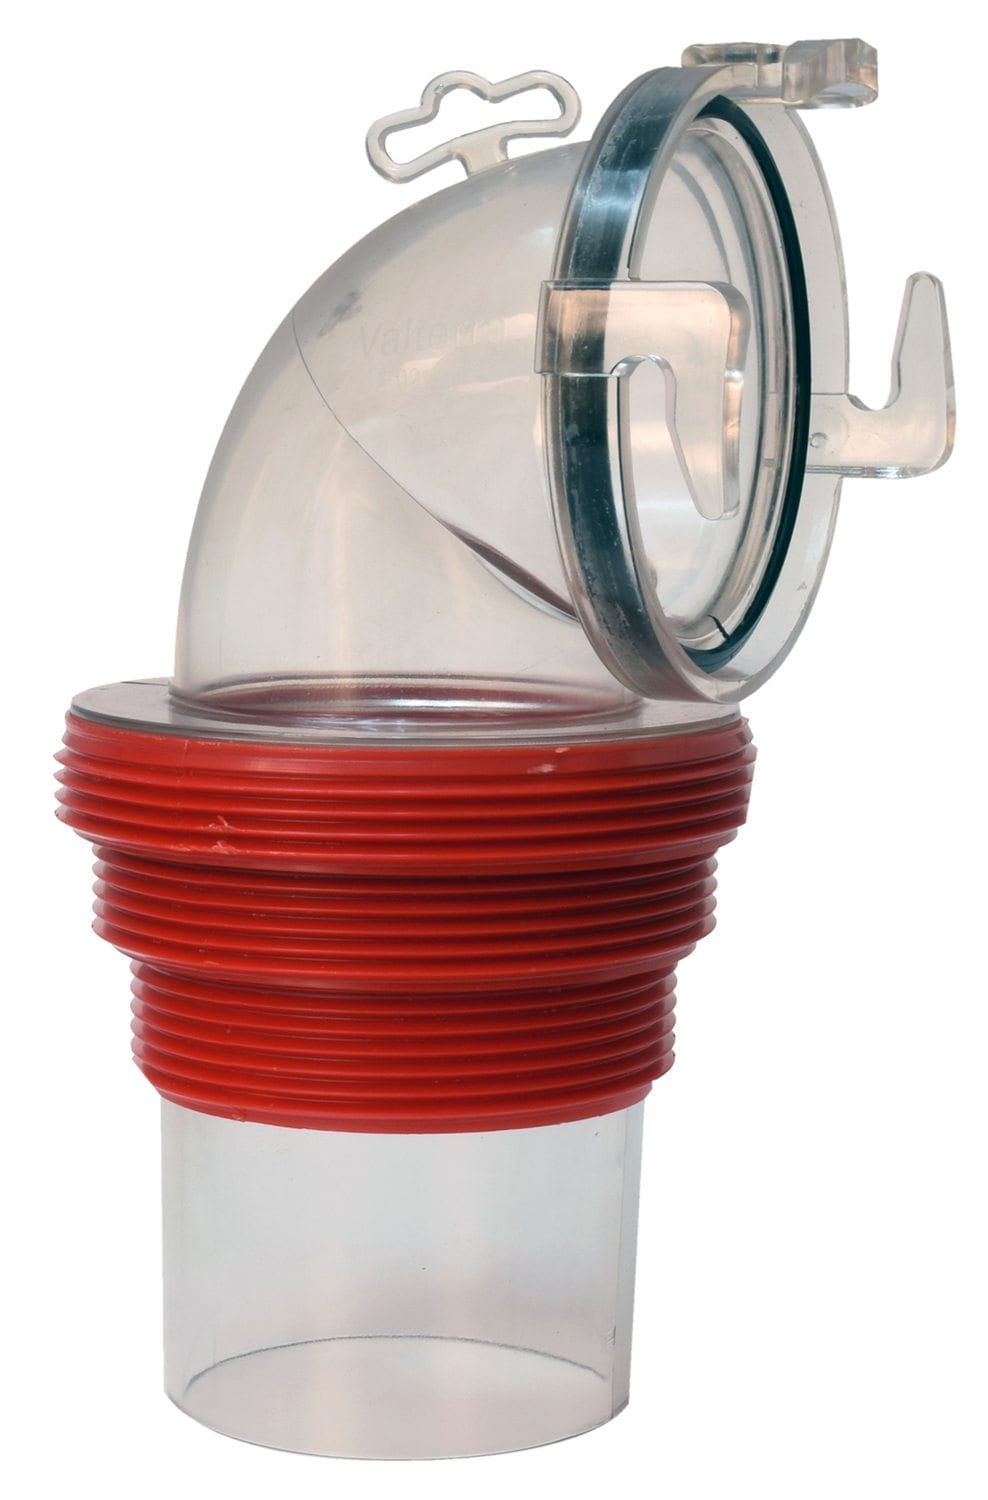 EZ Coupler Threaded 90-Degree Bayonet Sewer Fitting - Clear 